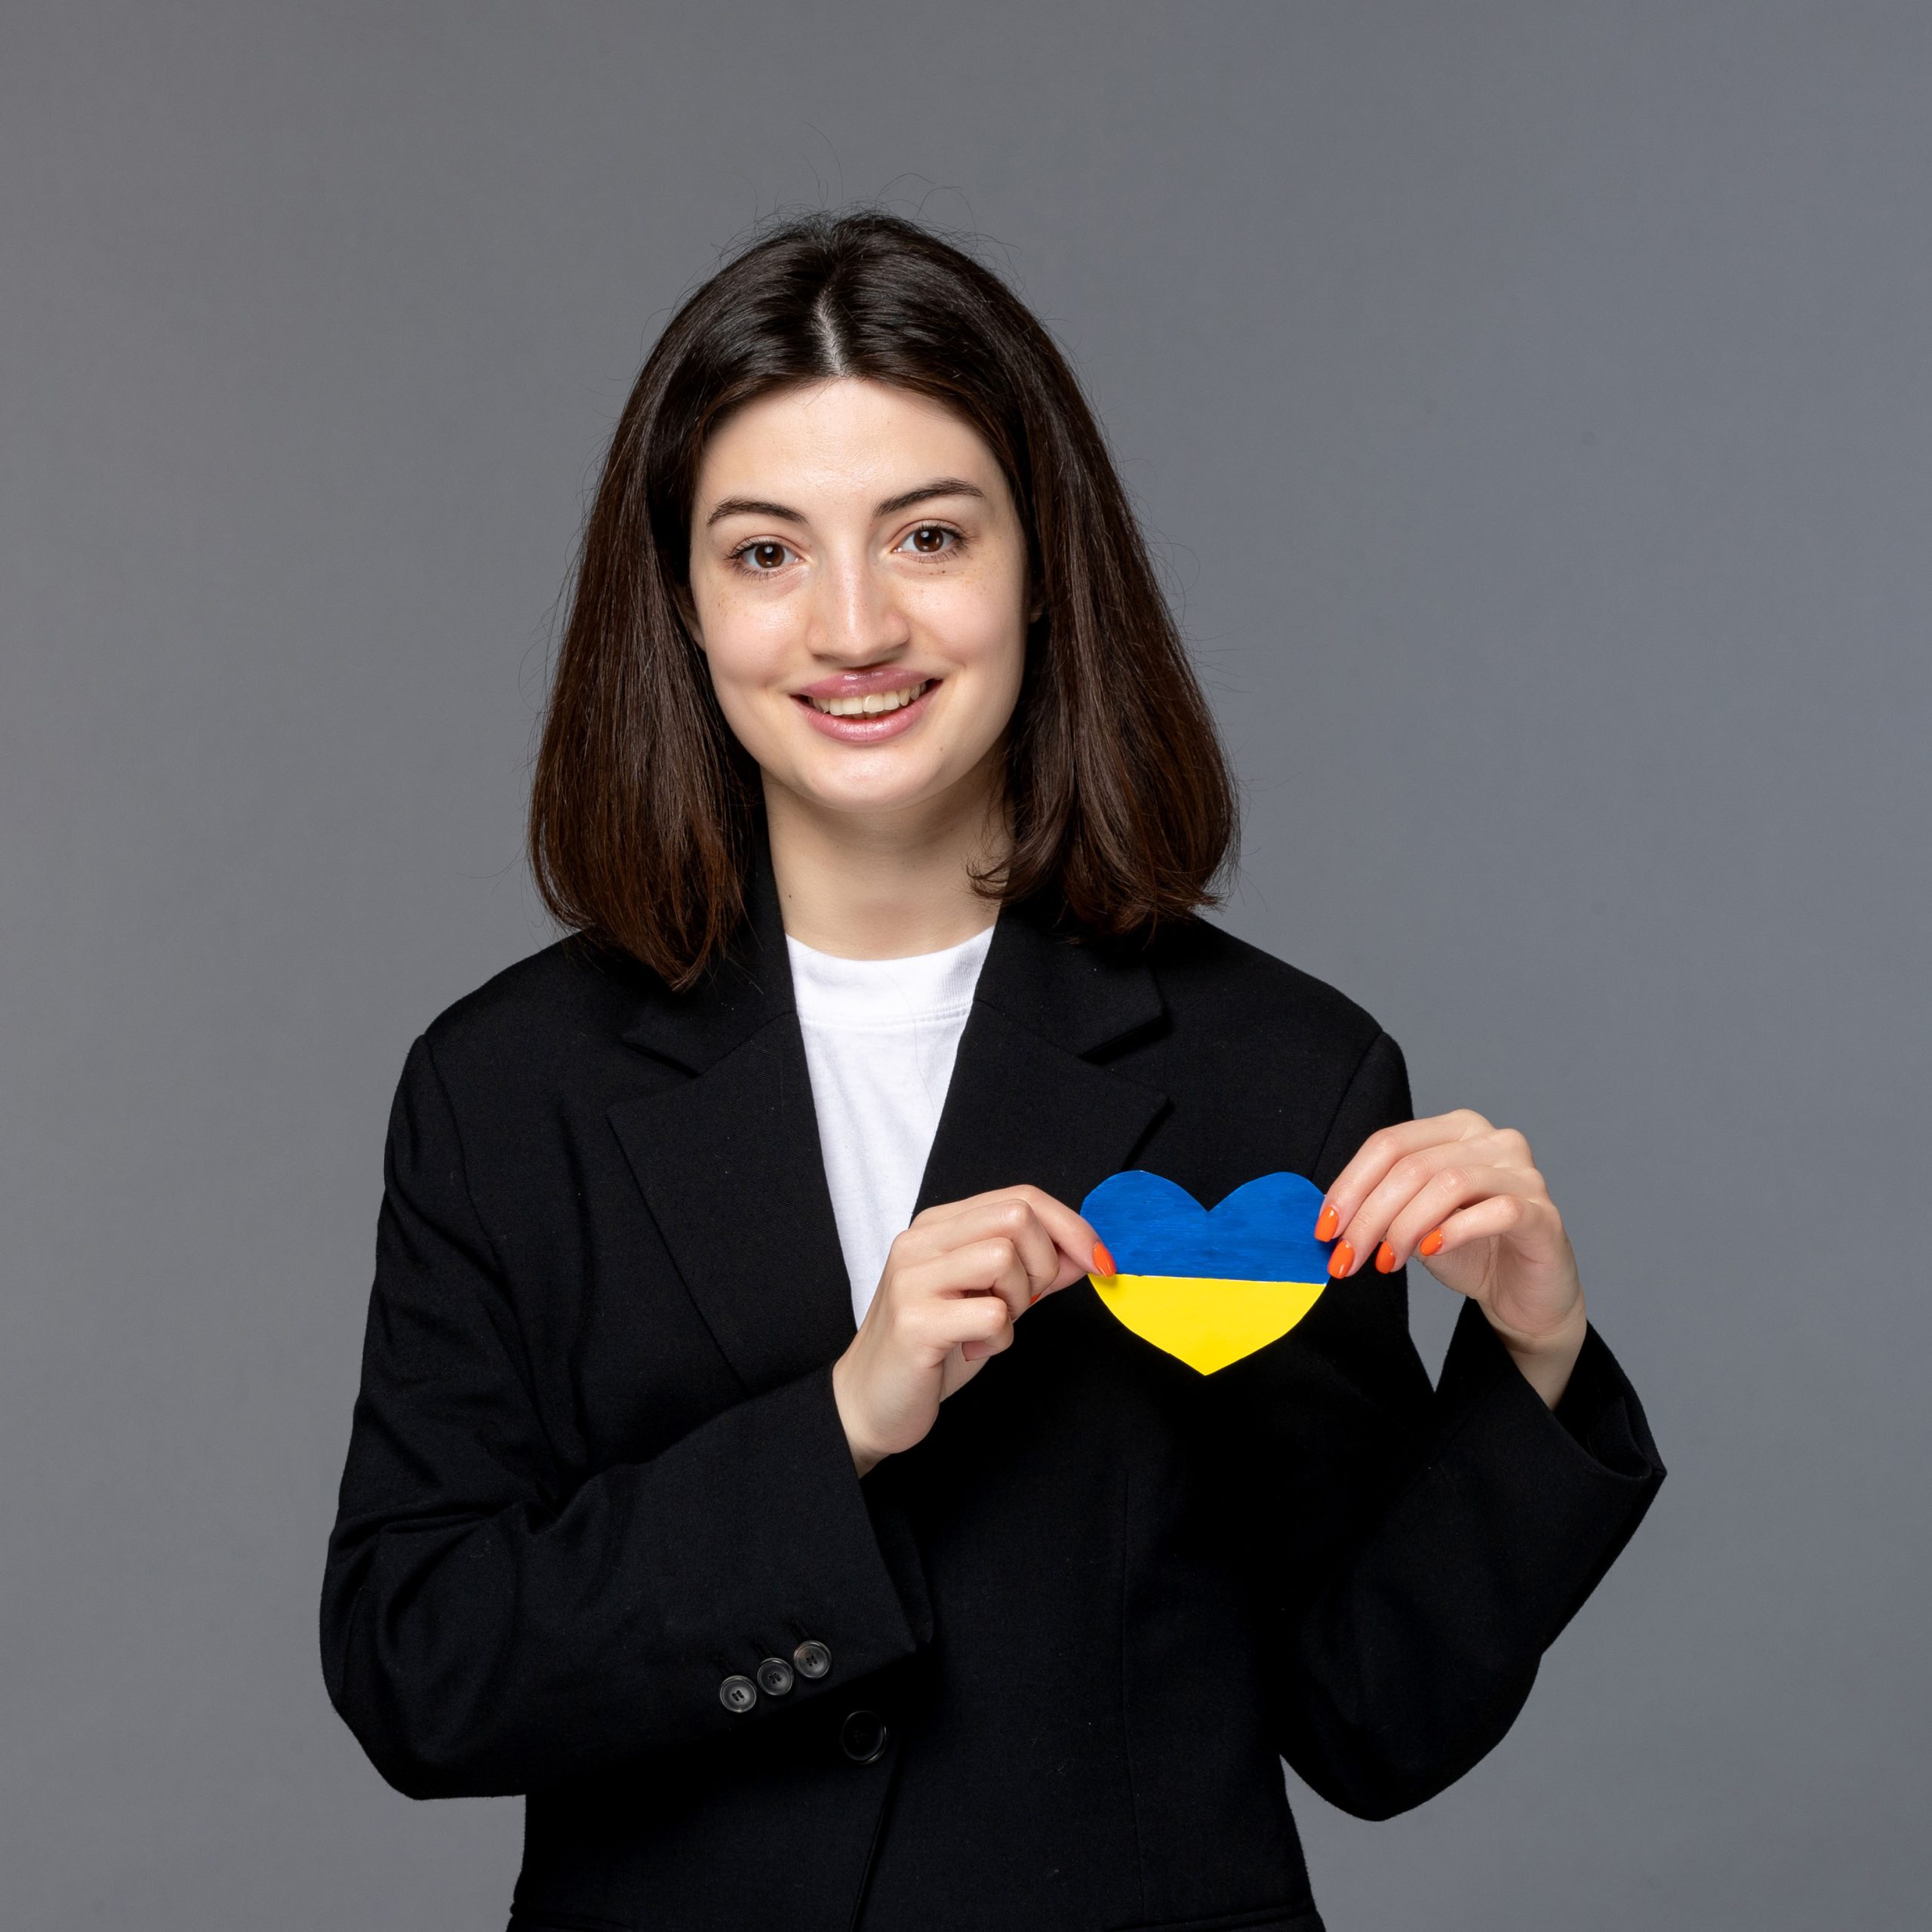 ukraine russian conflict cute young dark hair woman in black blazer brave with heart